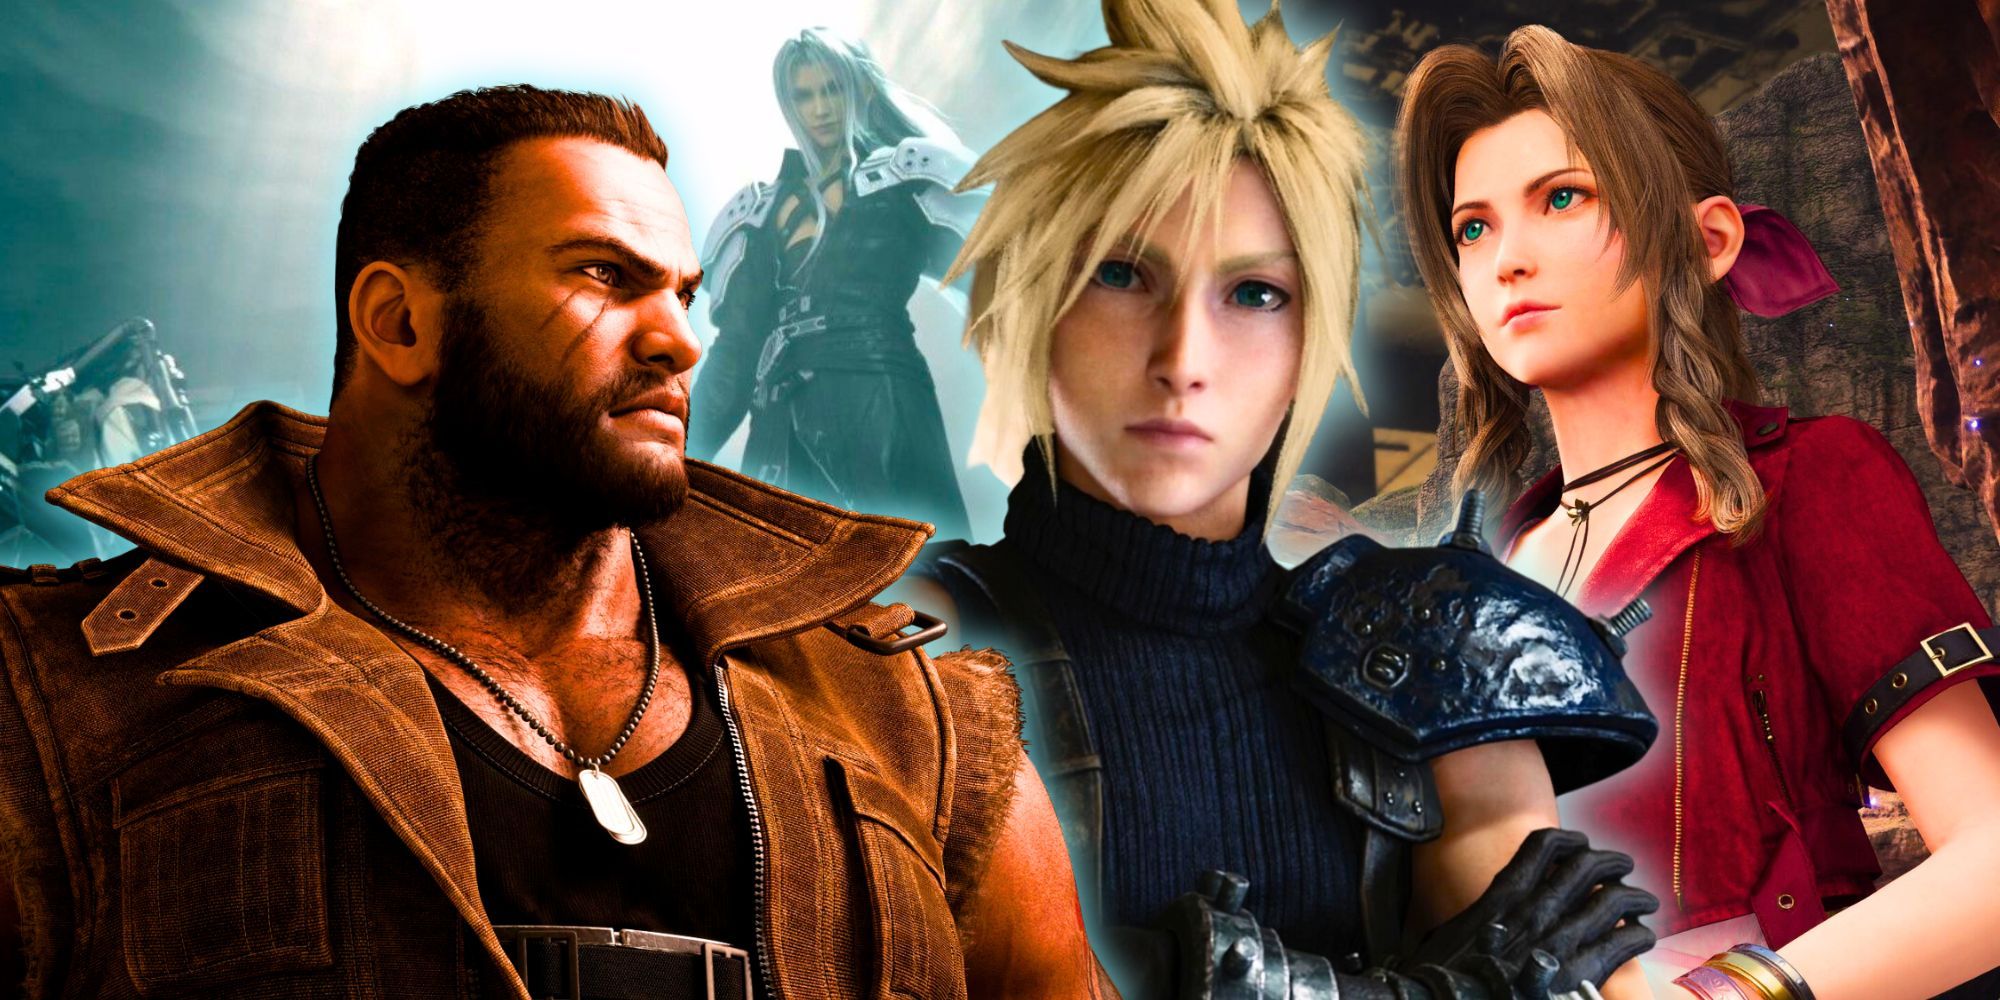 Final Fantasy' Live-Action TV Series in Works